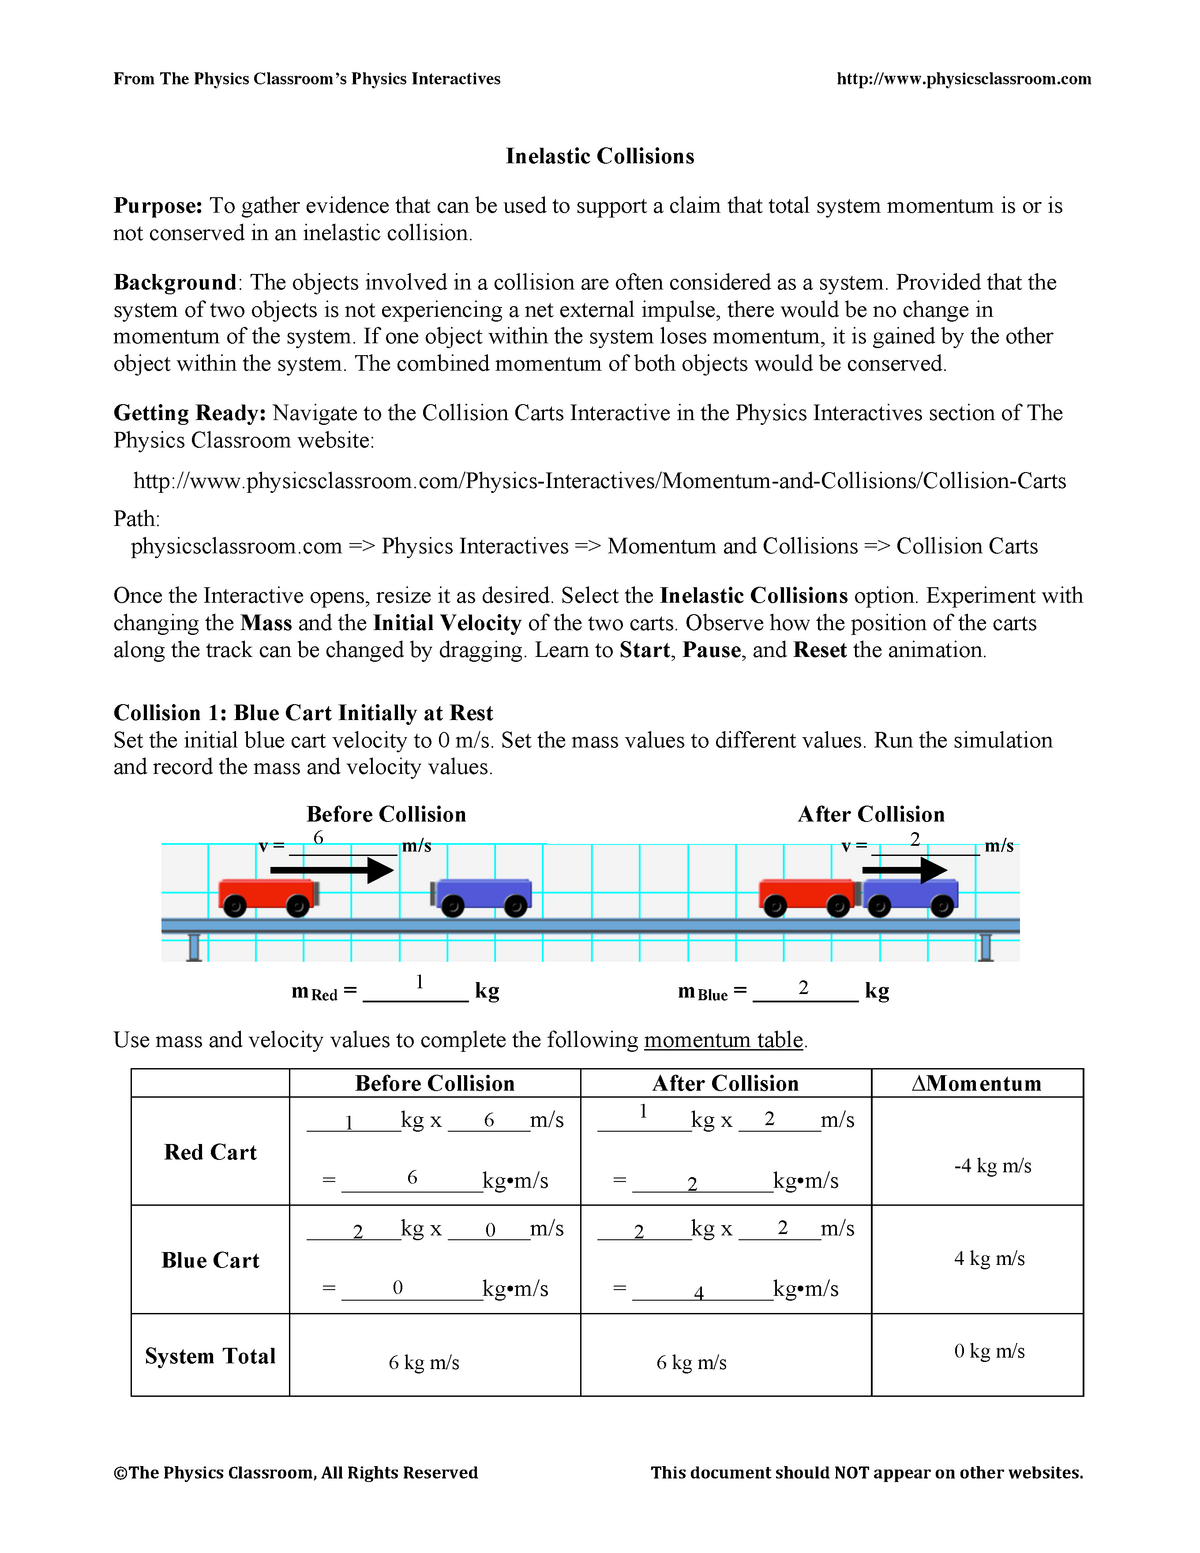 Inelastic Collisions Physics Classroom - From The Physics Within Momentum And Collisions Worksheet Answers